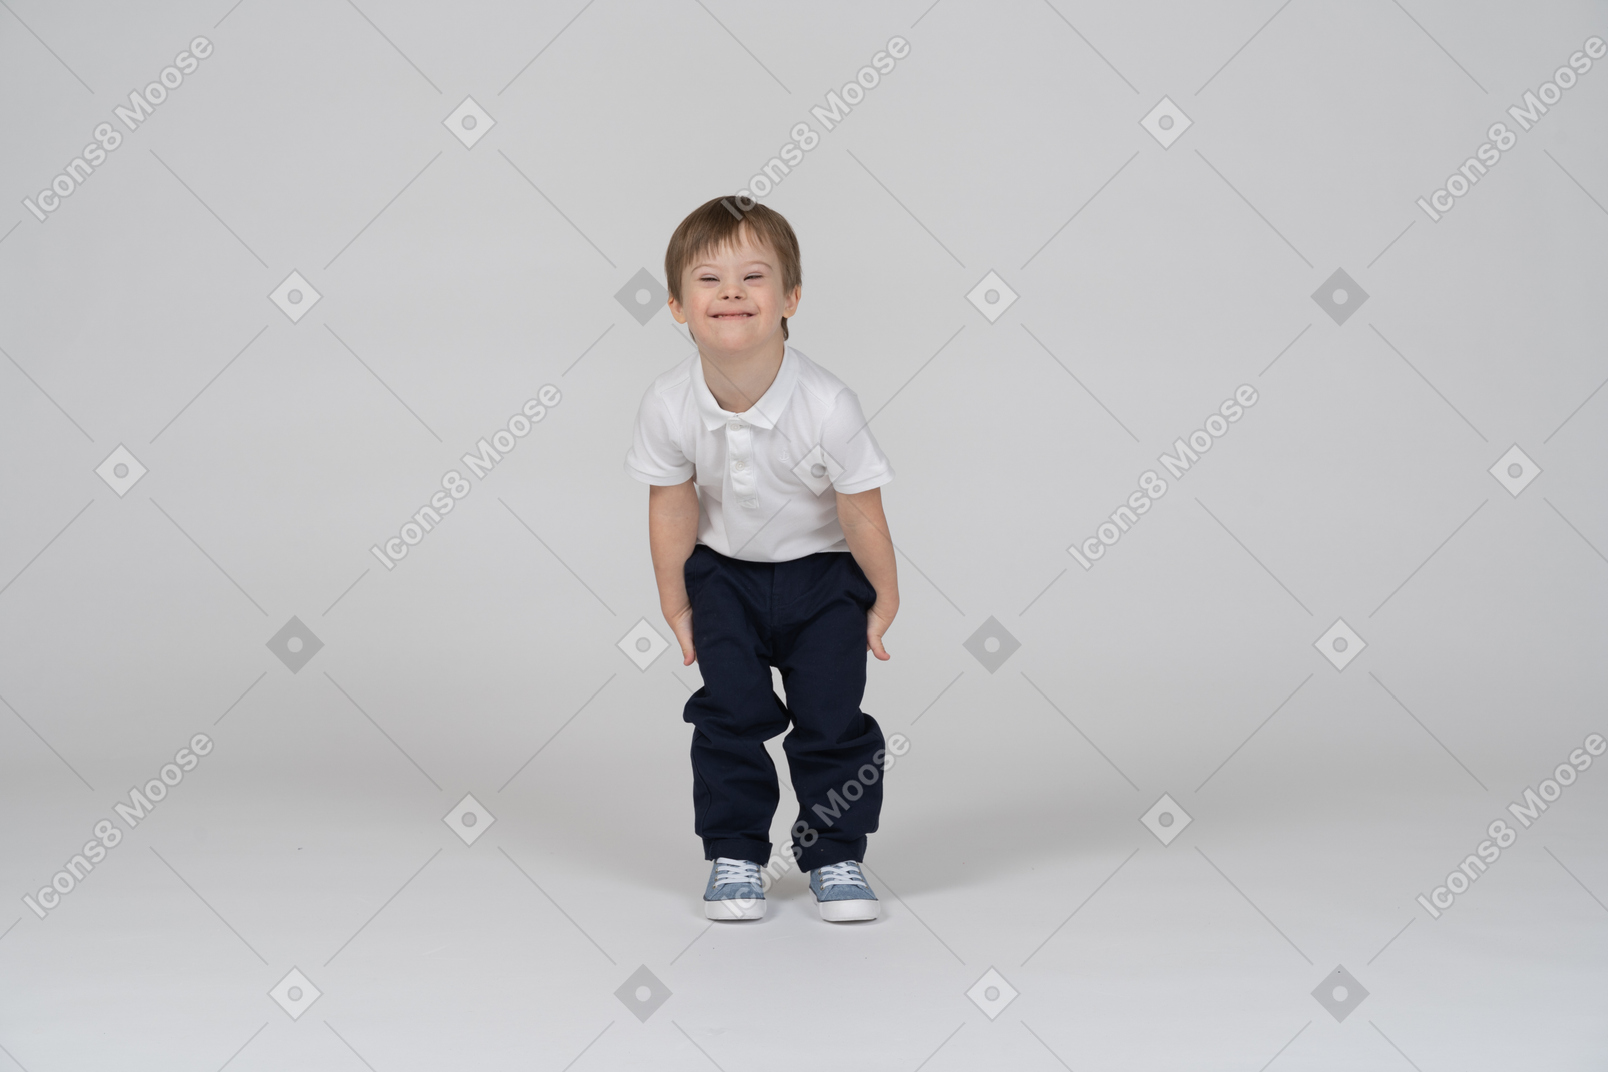 Cheerful child standing with knees slightly bent